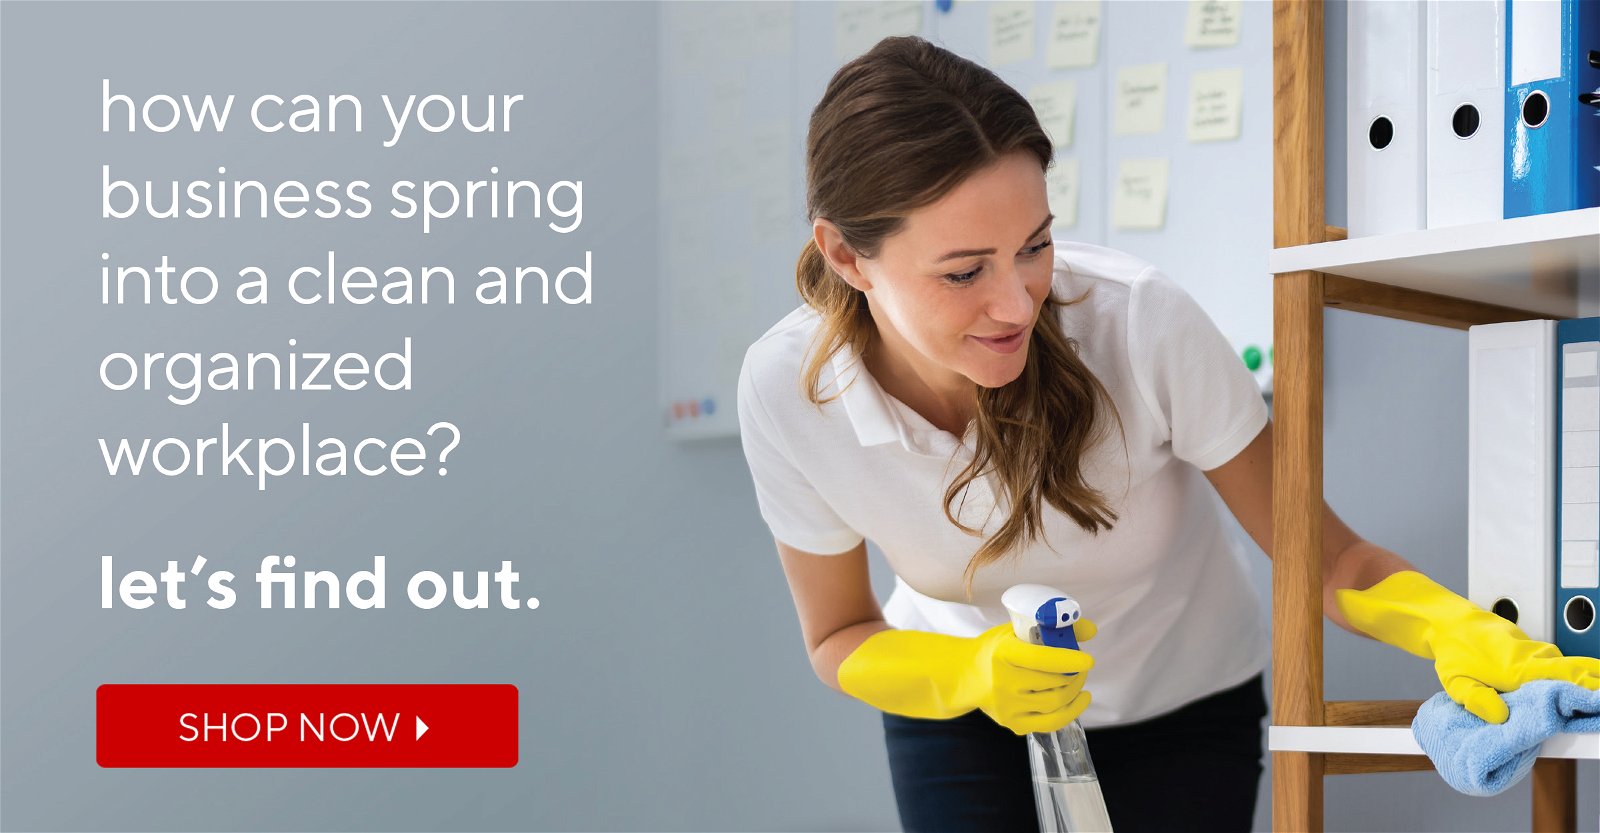 how can your business spring into a clean and organized workplace? let’s find out.